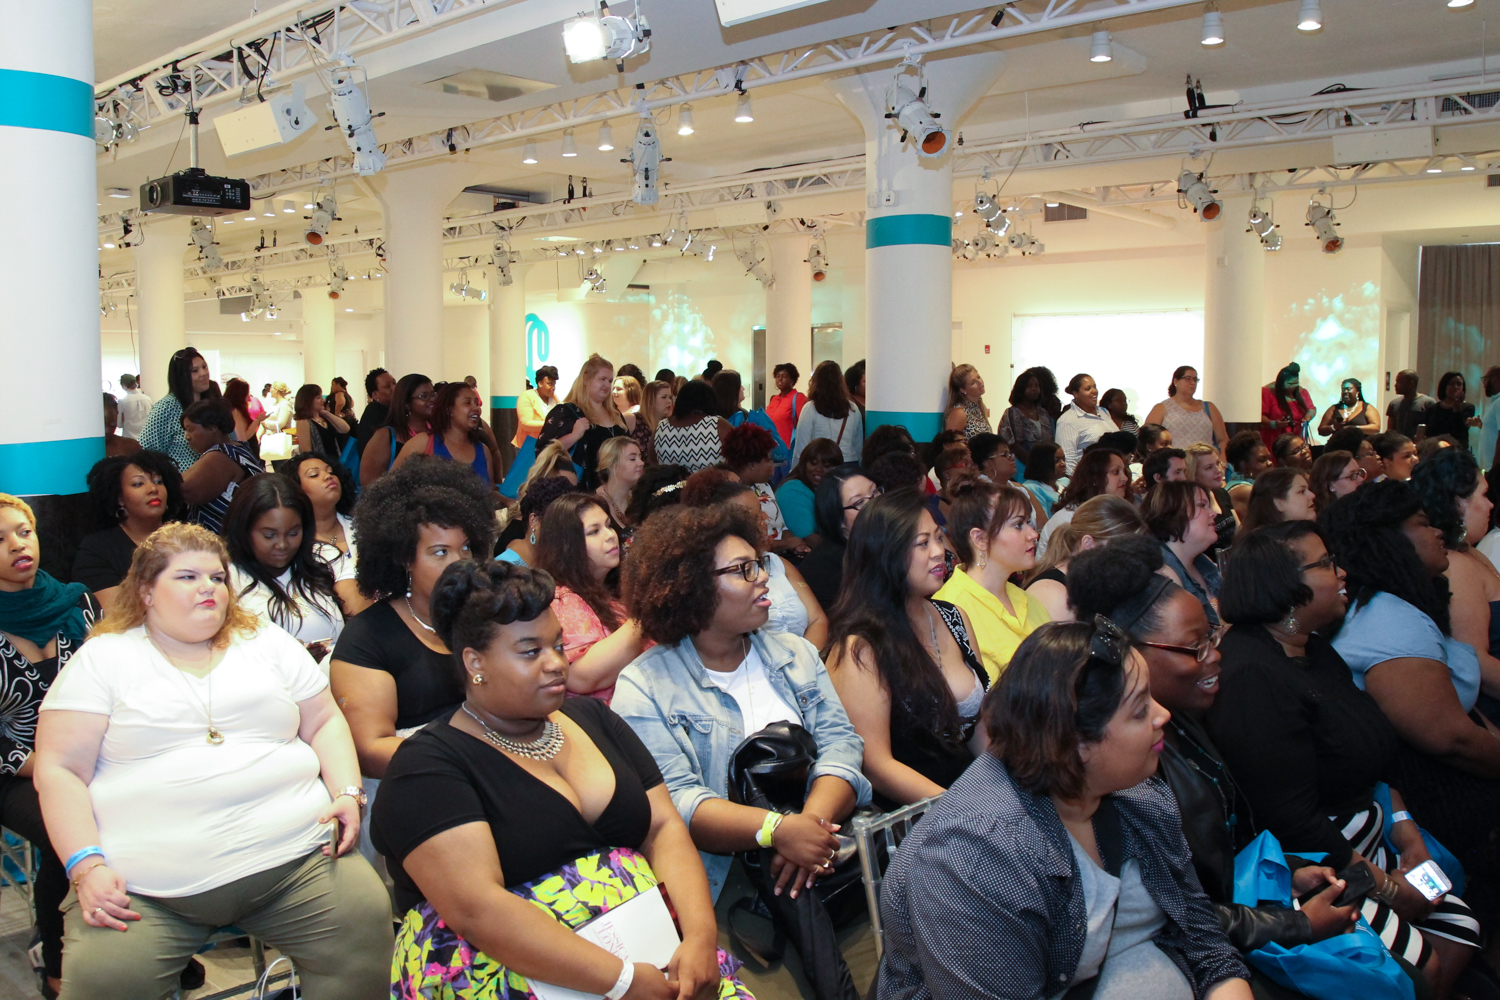 PHOTO: Roughly 500 women attended The Curvy Con, flying in from all over the world.